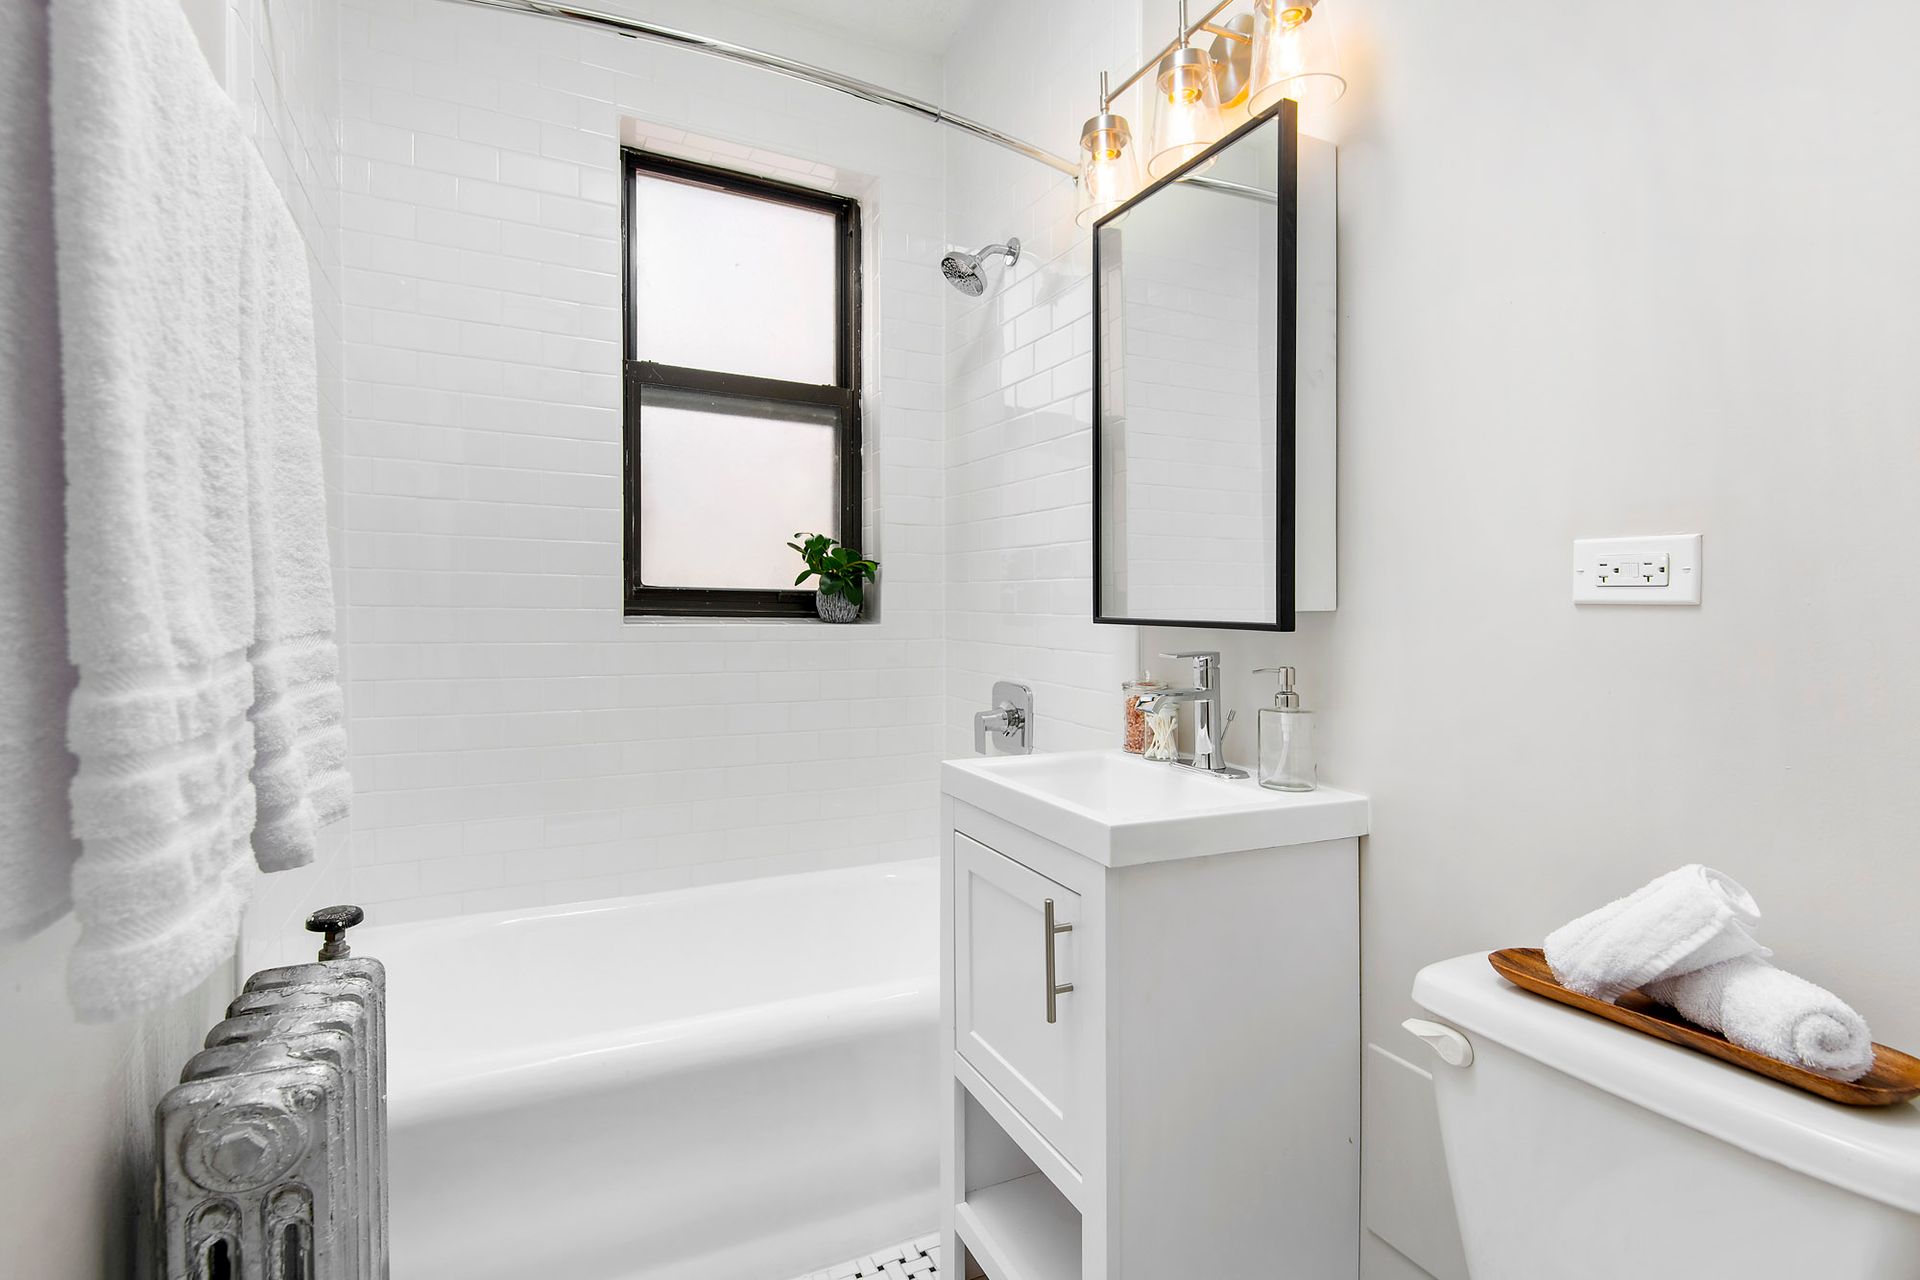 A bathroom with a tub, sink, mirror, and window at Reside at Belmont Harbor. 